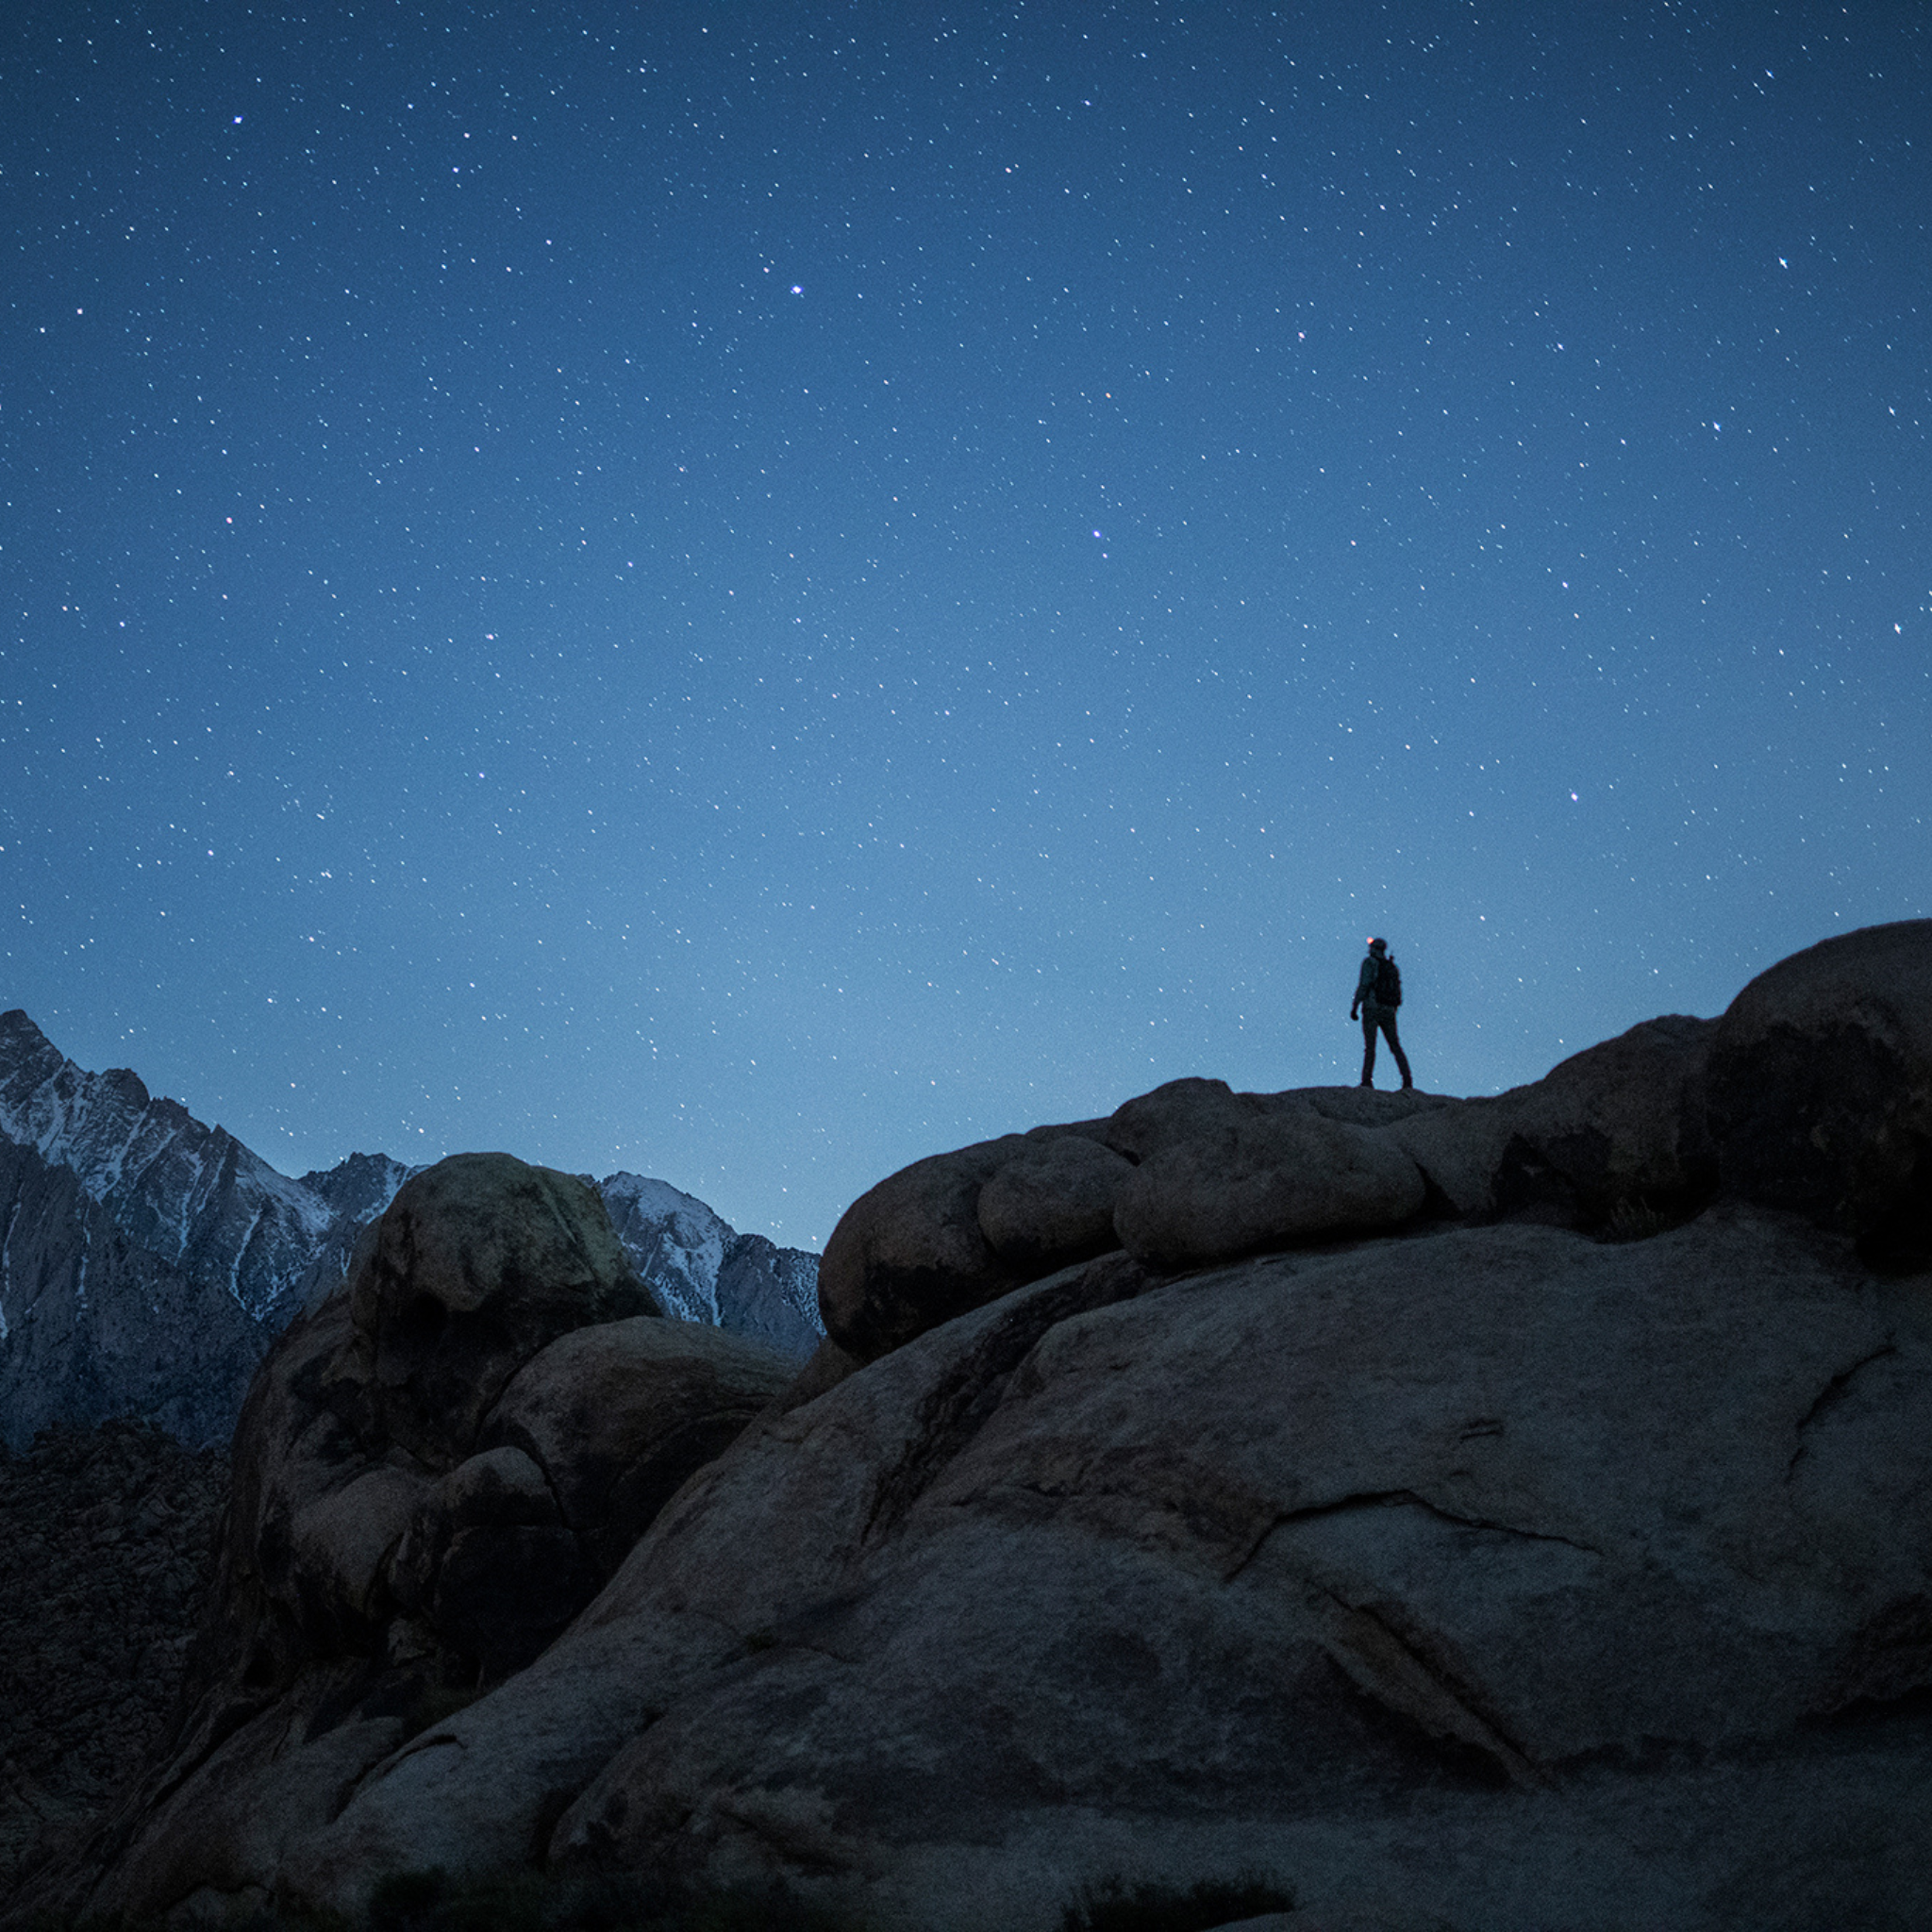 Far away nighttime shot of man on mountains surrounded by a star-filled sky.